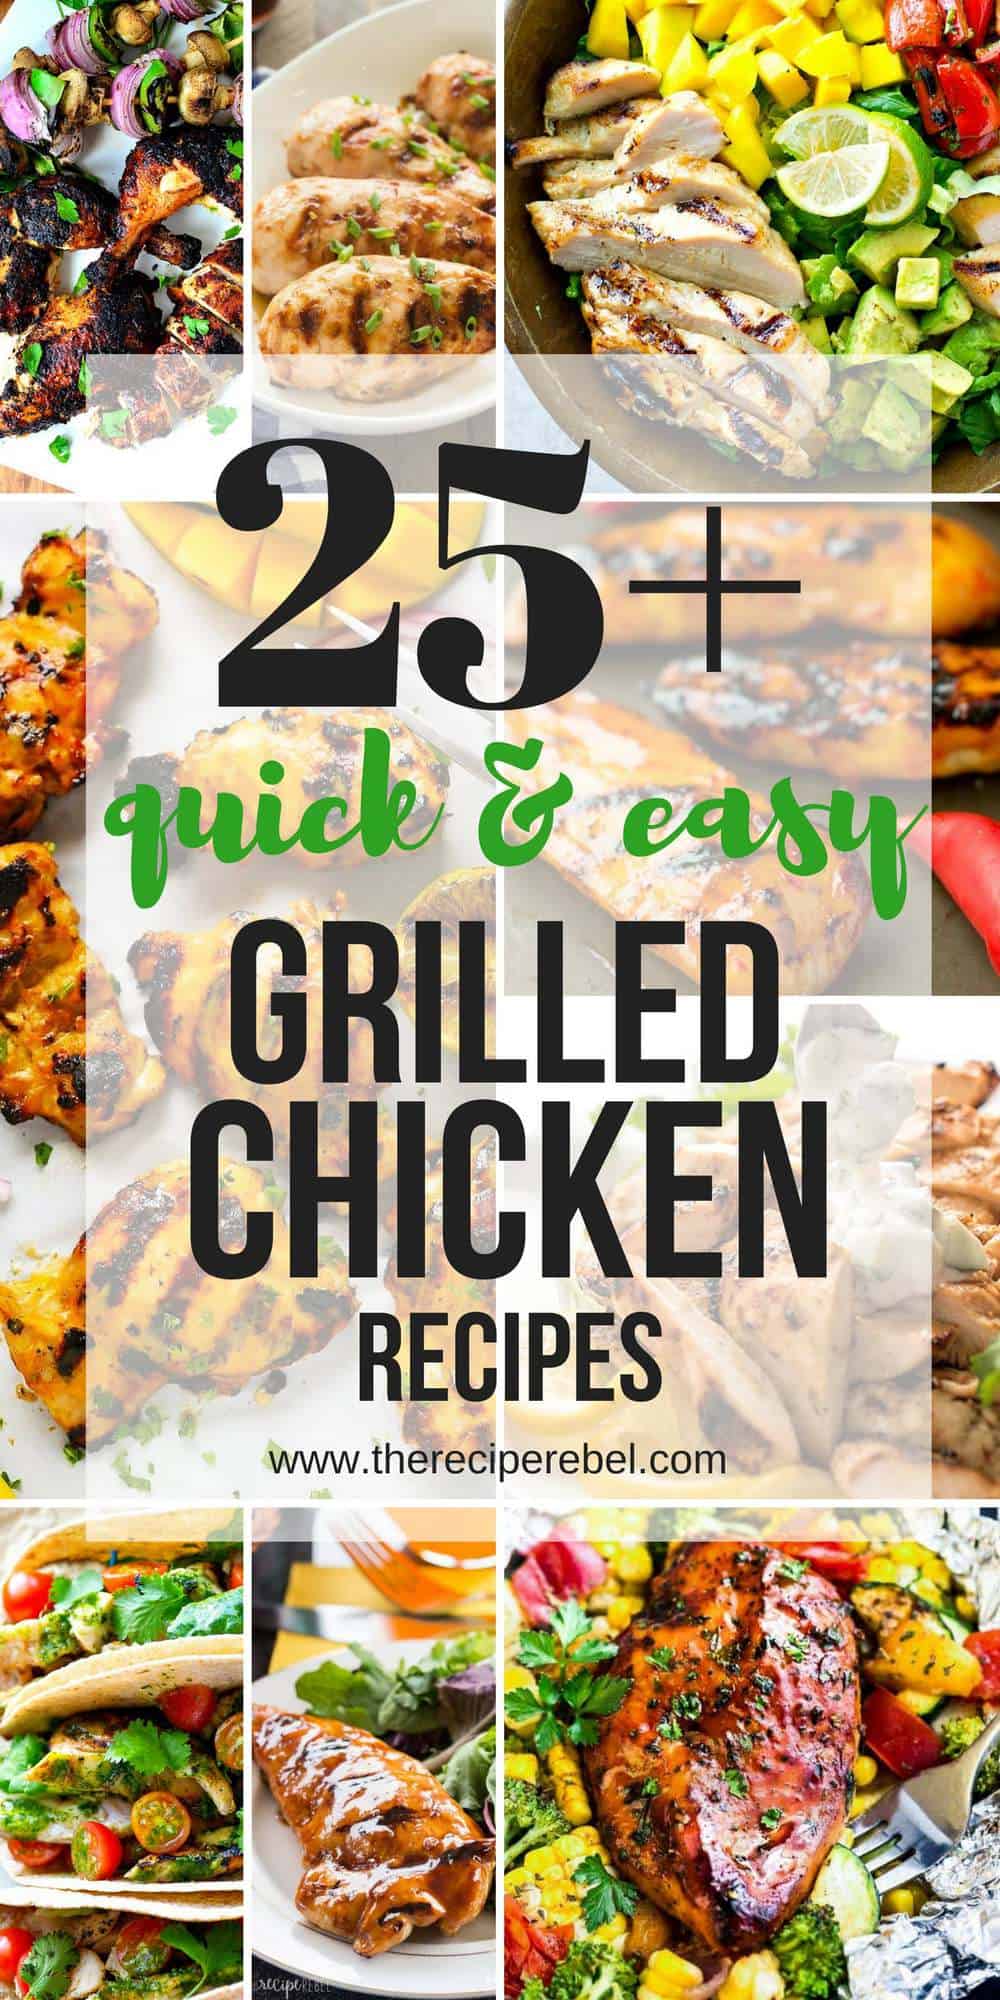 grilled chicken recipes collage with multiple images and title in black and green text